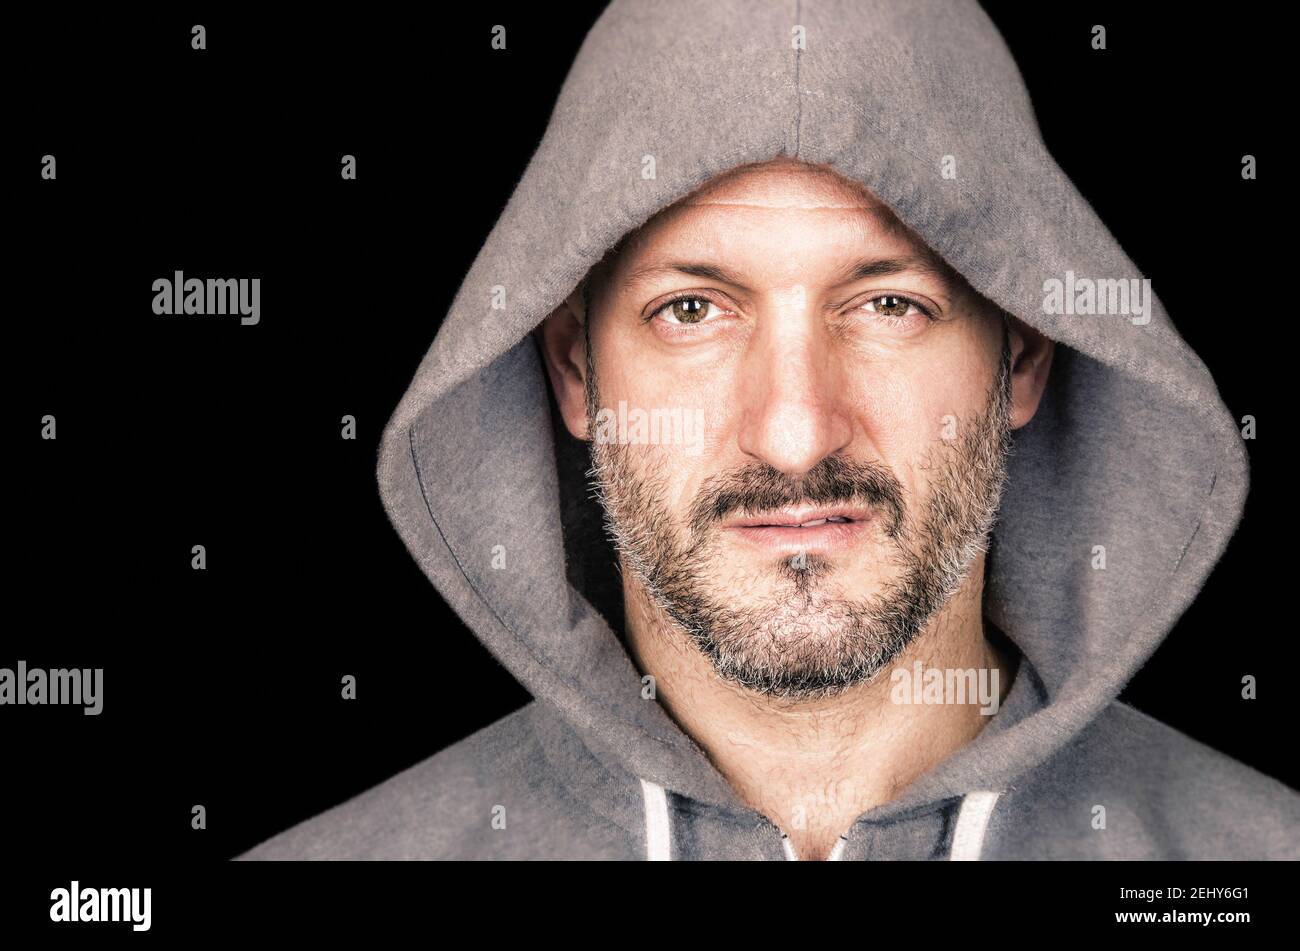 Serious angry man with hooded sweatshirt Stock Photo